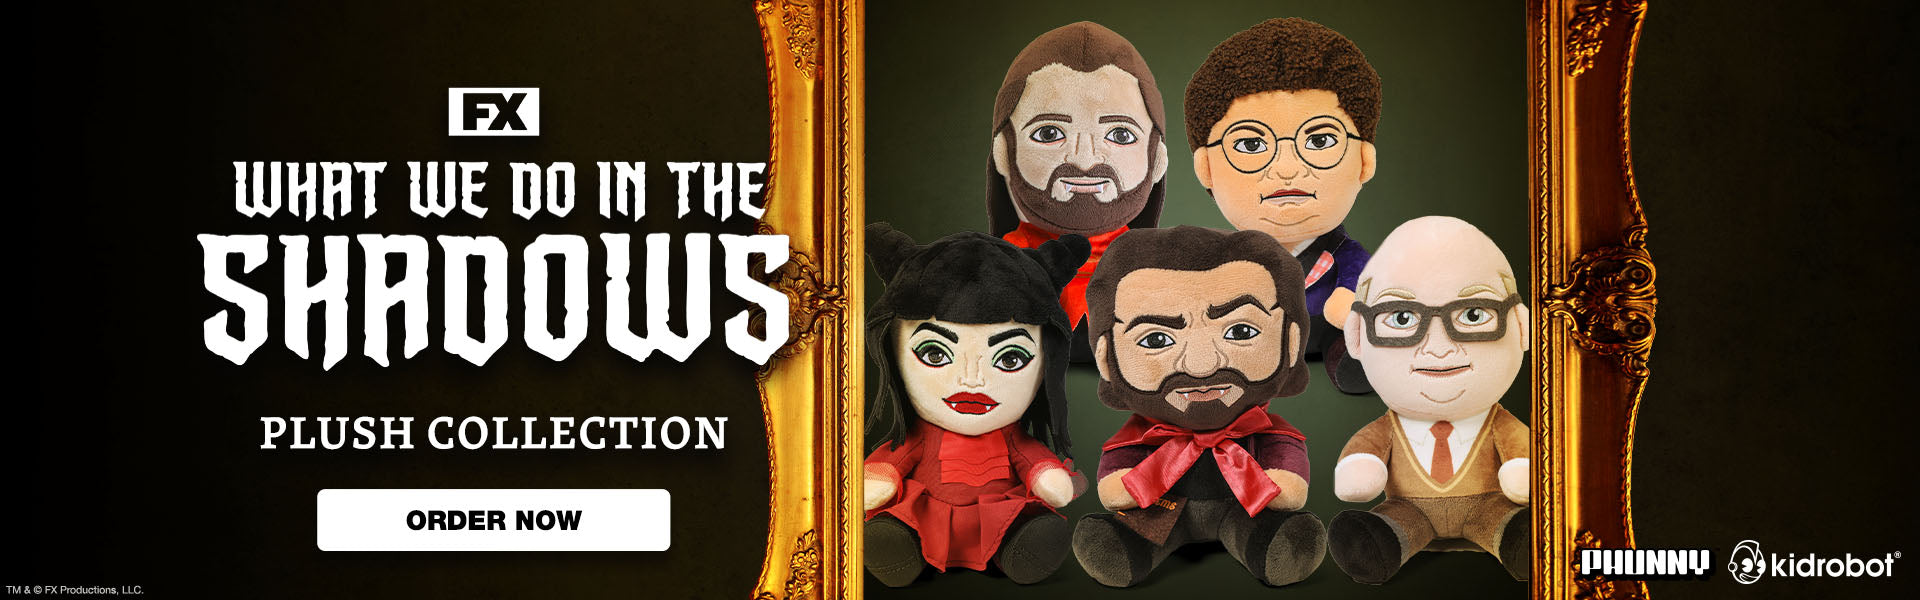 What We do in the Shadows Collection